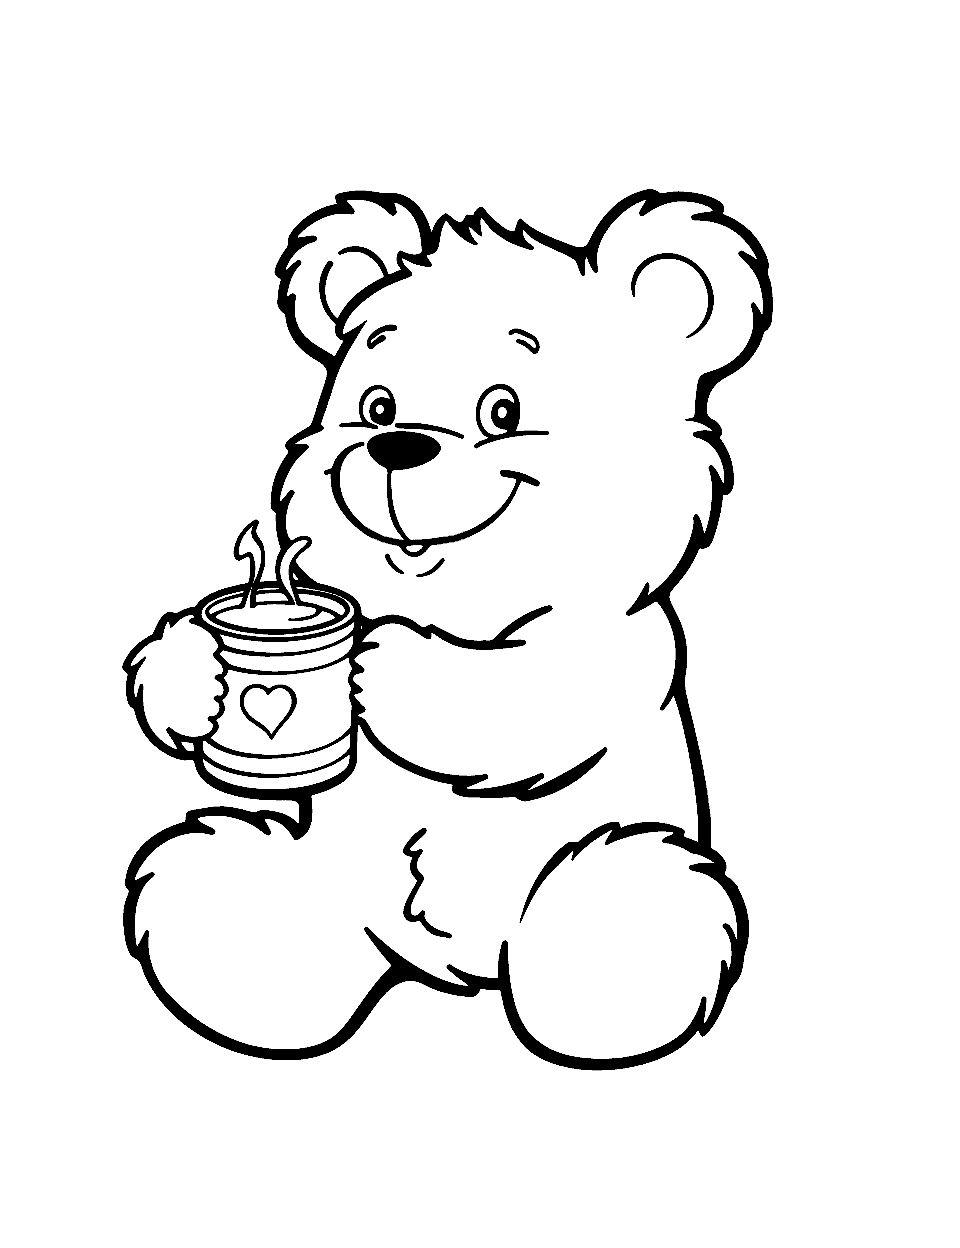 Teddy Bear with Hot Cocoa Coloring Page - A teddy bear holding a cozy cup of hot cocoa.